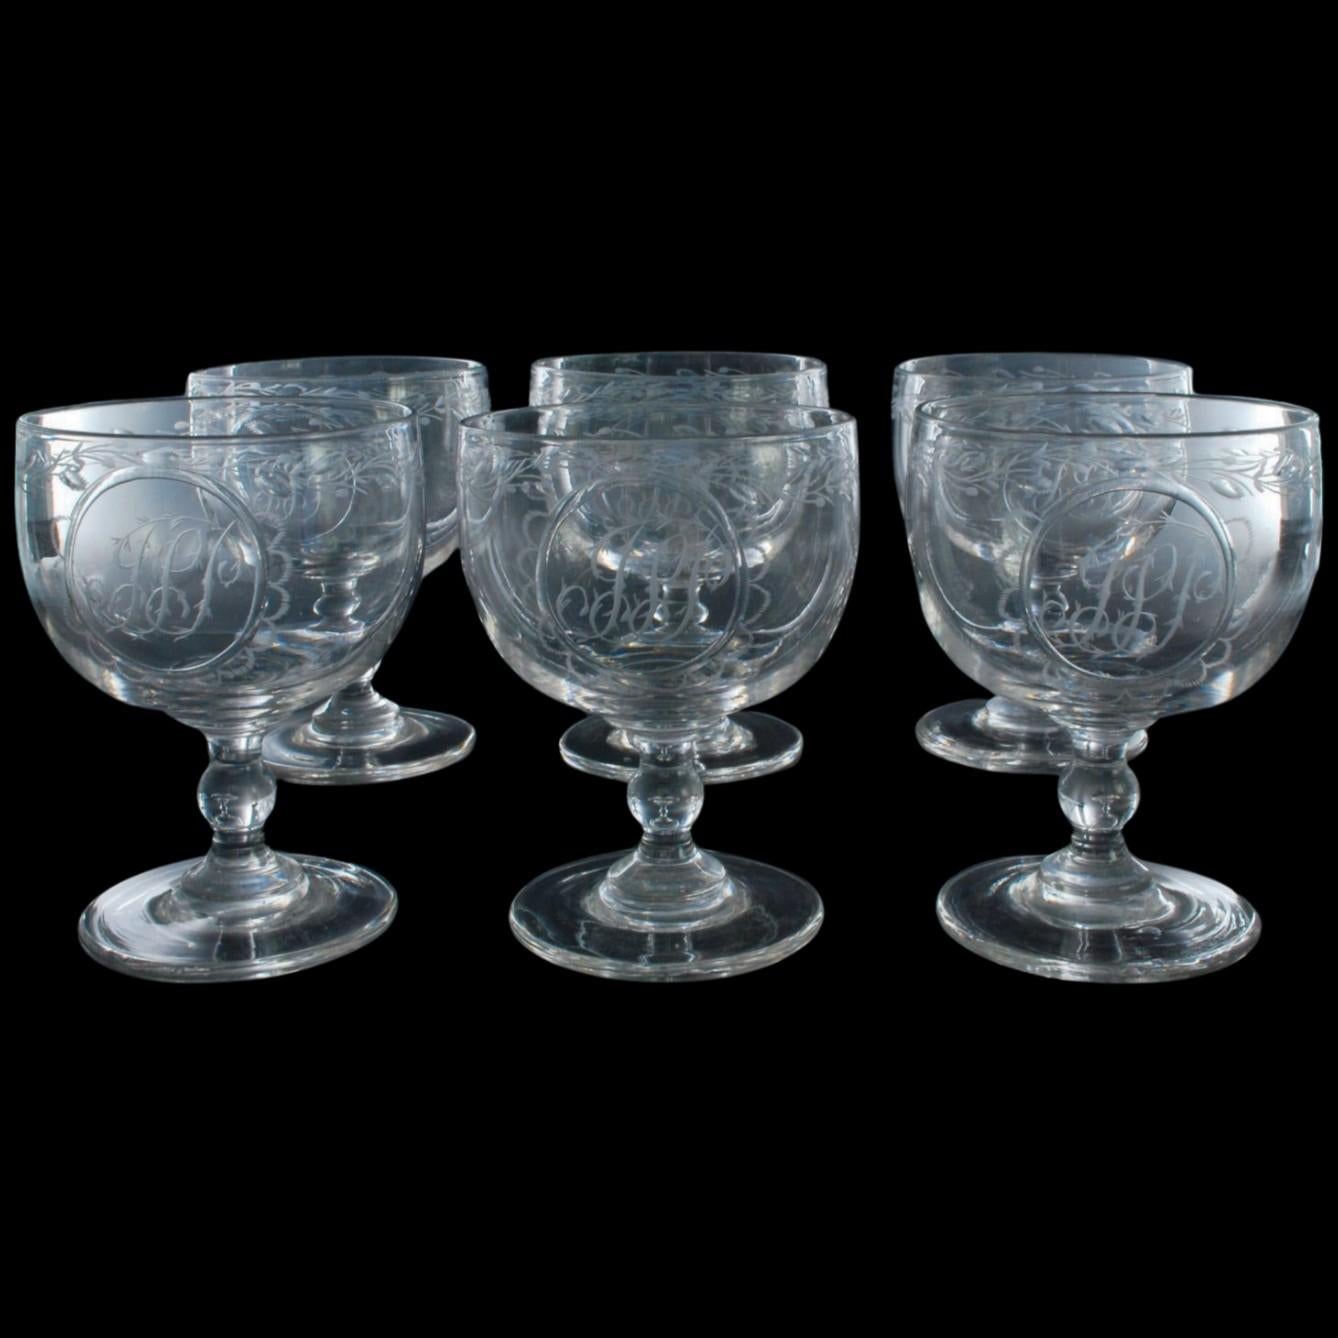 A set of six rummers, or wine glasses, beautifully engraved with leaves and branches and a monogram which seems to read JSP.

A rummer is a driking glass with a wide bowl, a short stem, and a wide foot. They are designed to be perfectly stable and